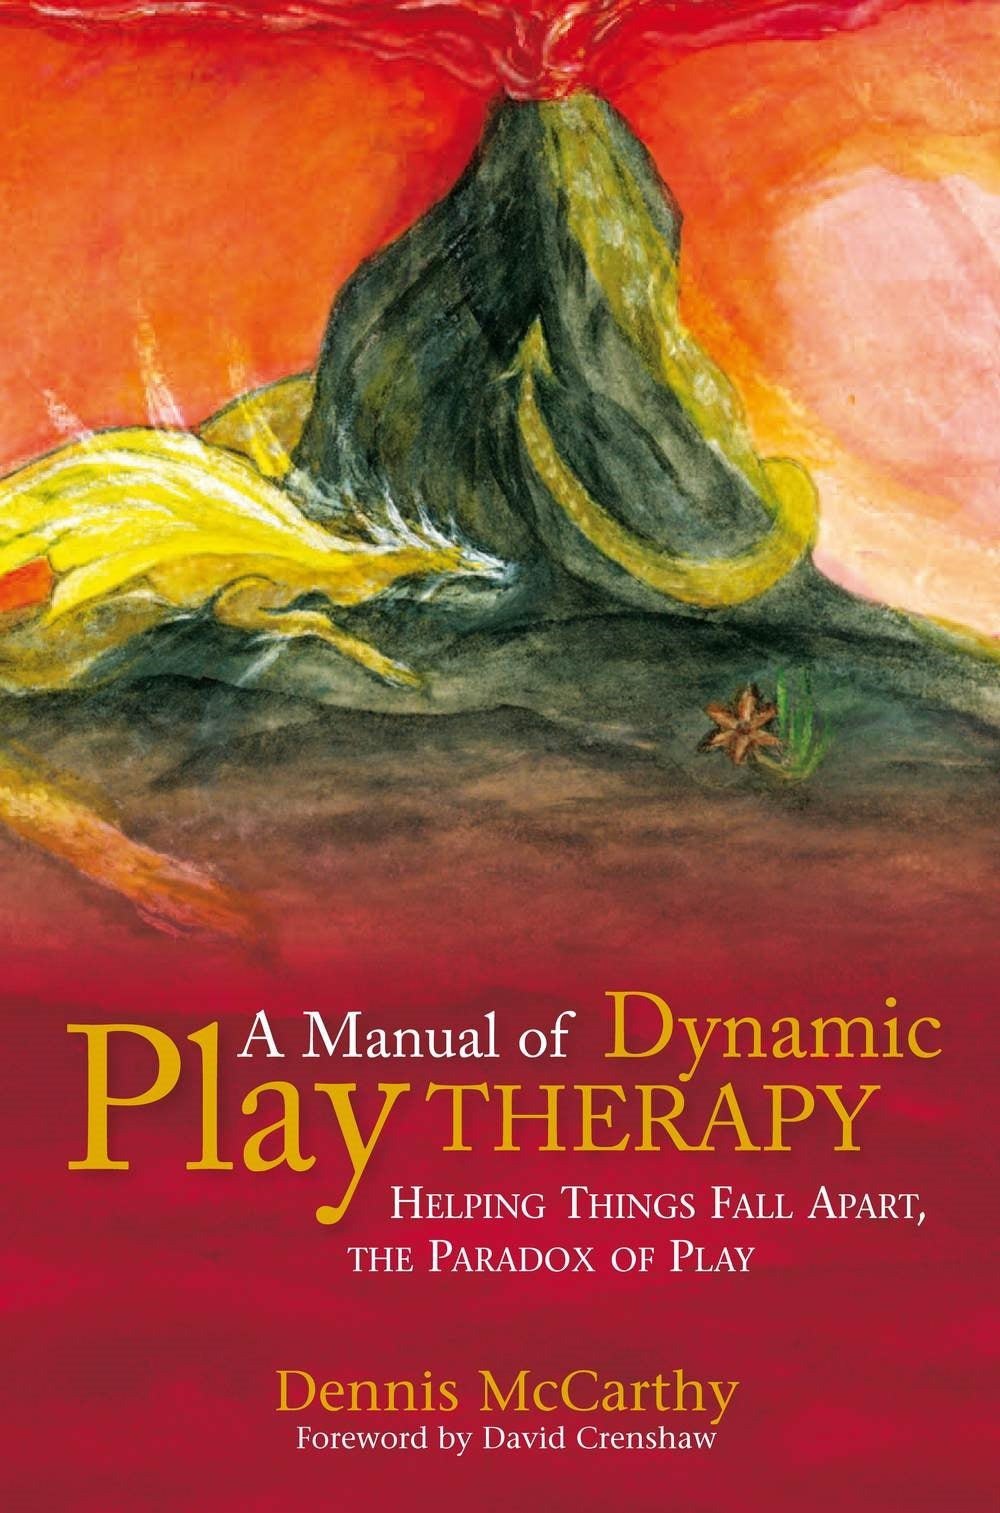 A Manual of Dynamic Play Therapy by Dennis McCarthy, David Crenshaw